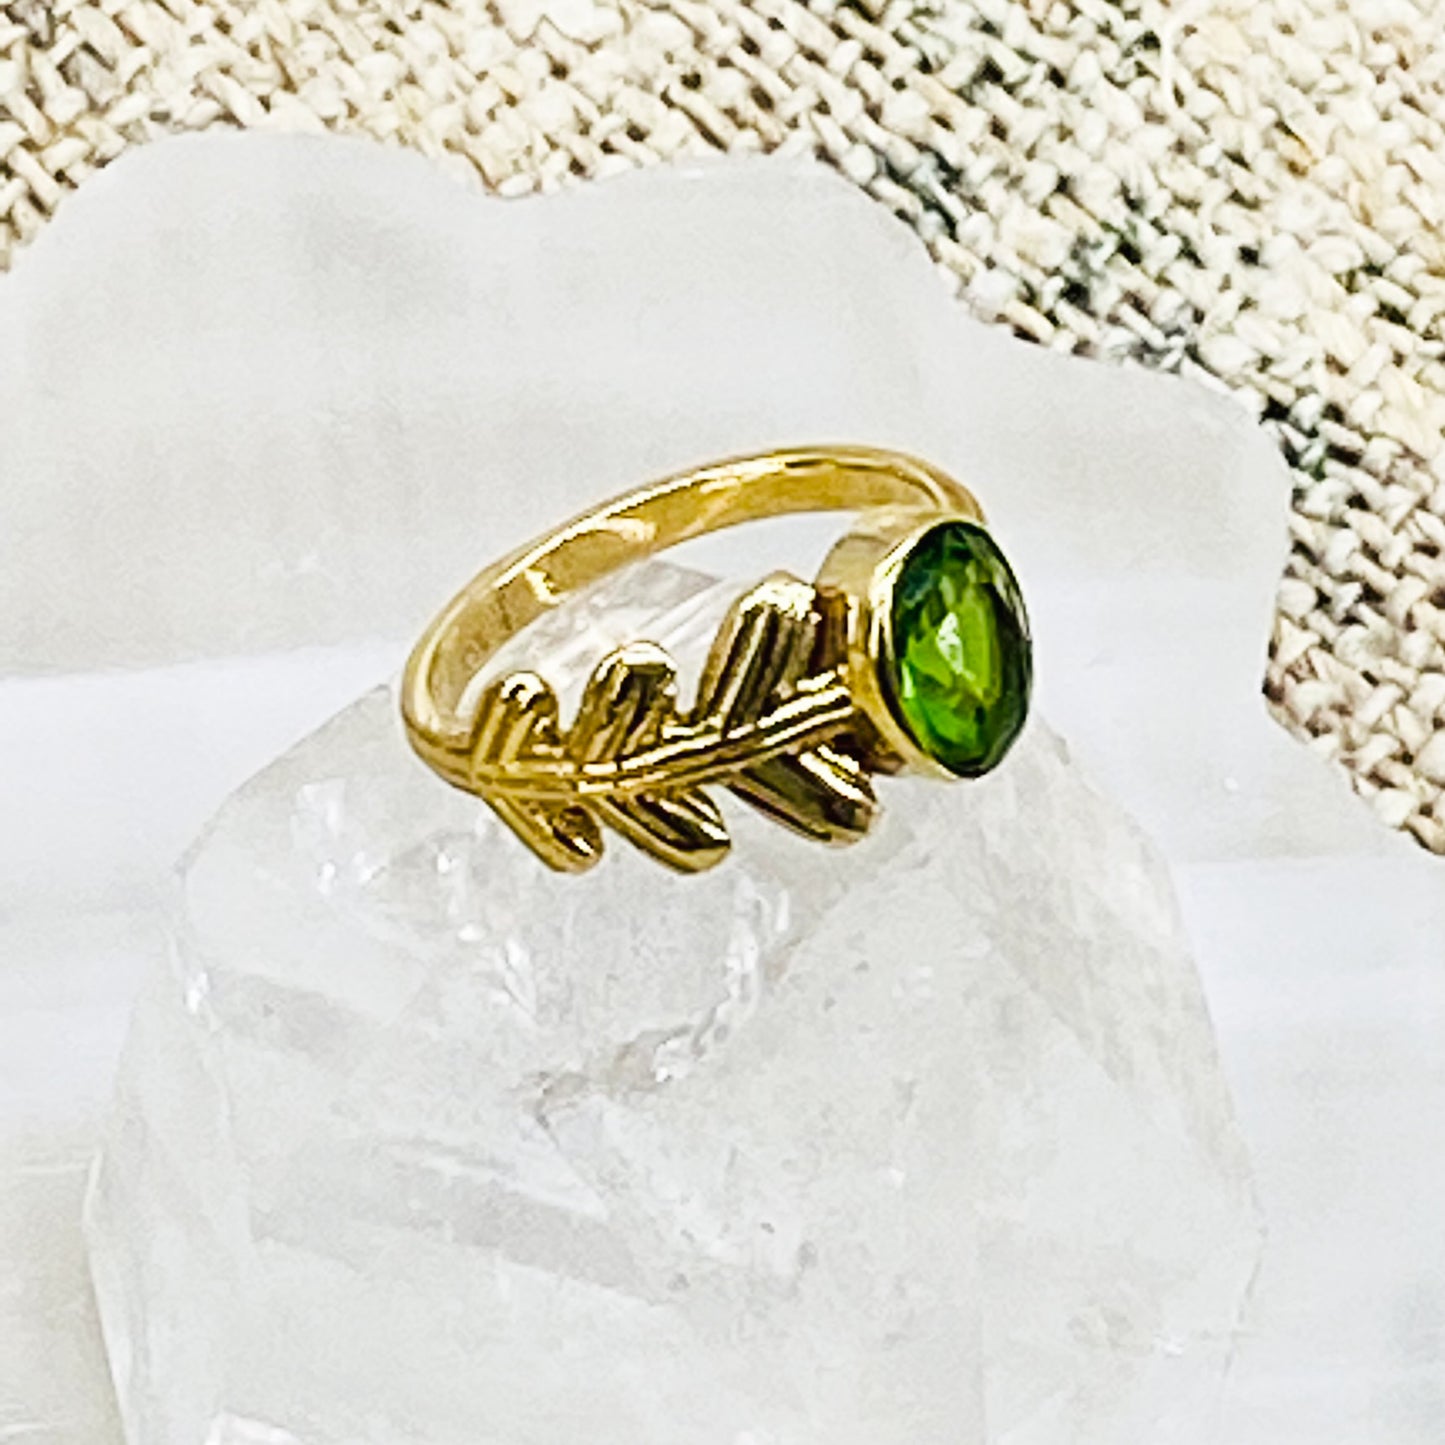 Gold Filled Crystal Ring, Handmade Jewelry, Leaf Style Ring, Bohemian Jewelry, Gift For Her, Non Tarnish Ring,Statement Ring, Stackable Ring